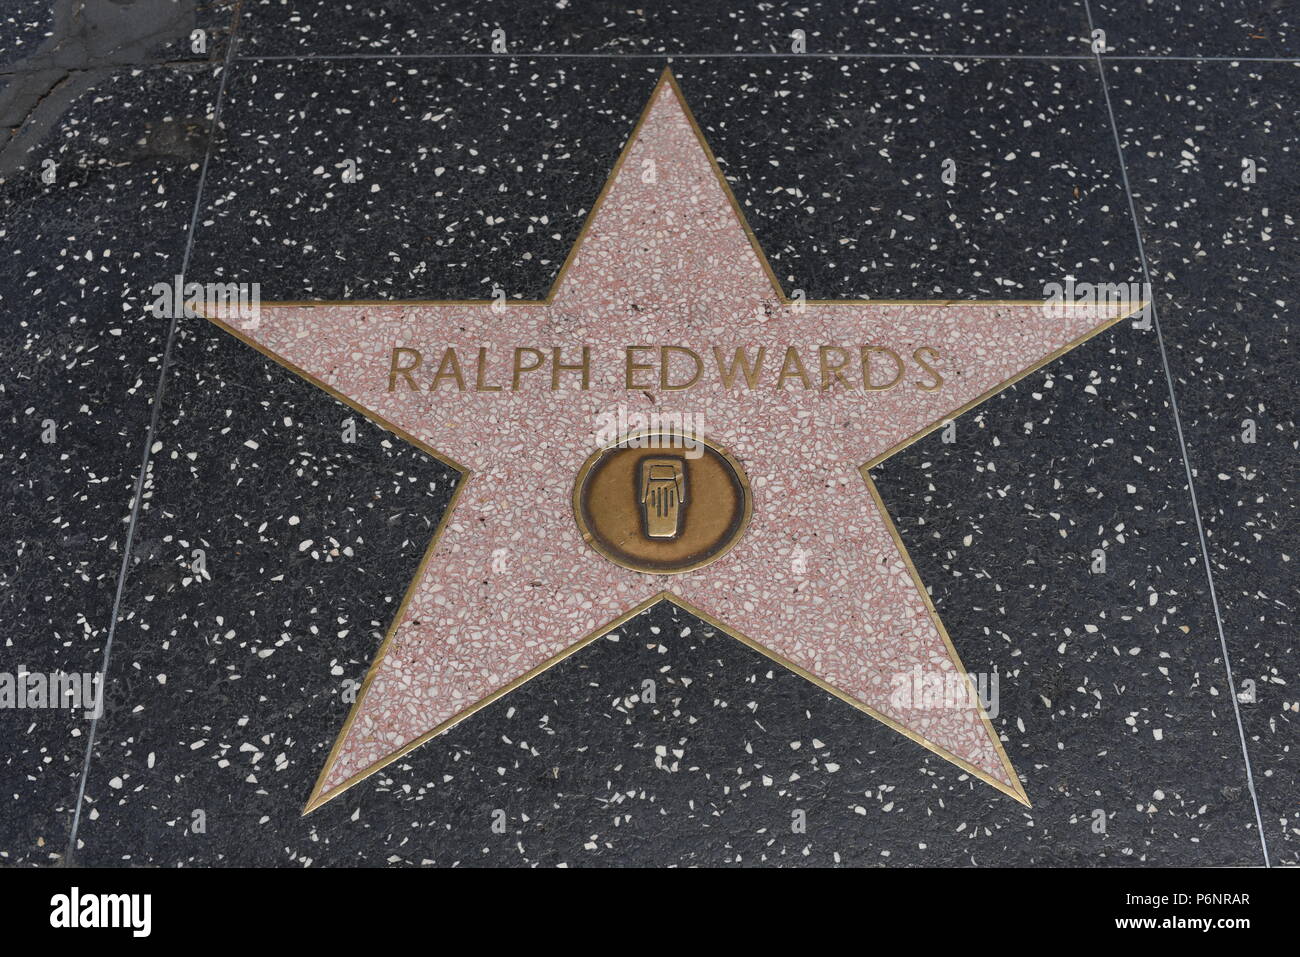 HOLLYWOOD, CA - June 29: Ralph Edwards star on the Hollywood Walk of Fame in Hollywood, California on June 29, 2018. Stock Photo